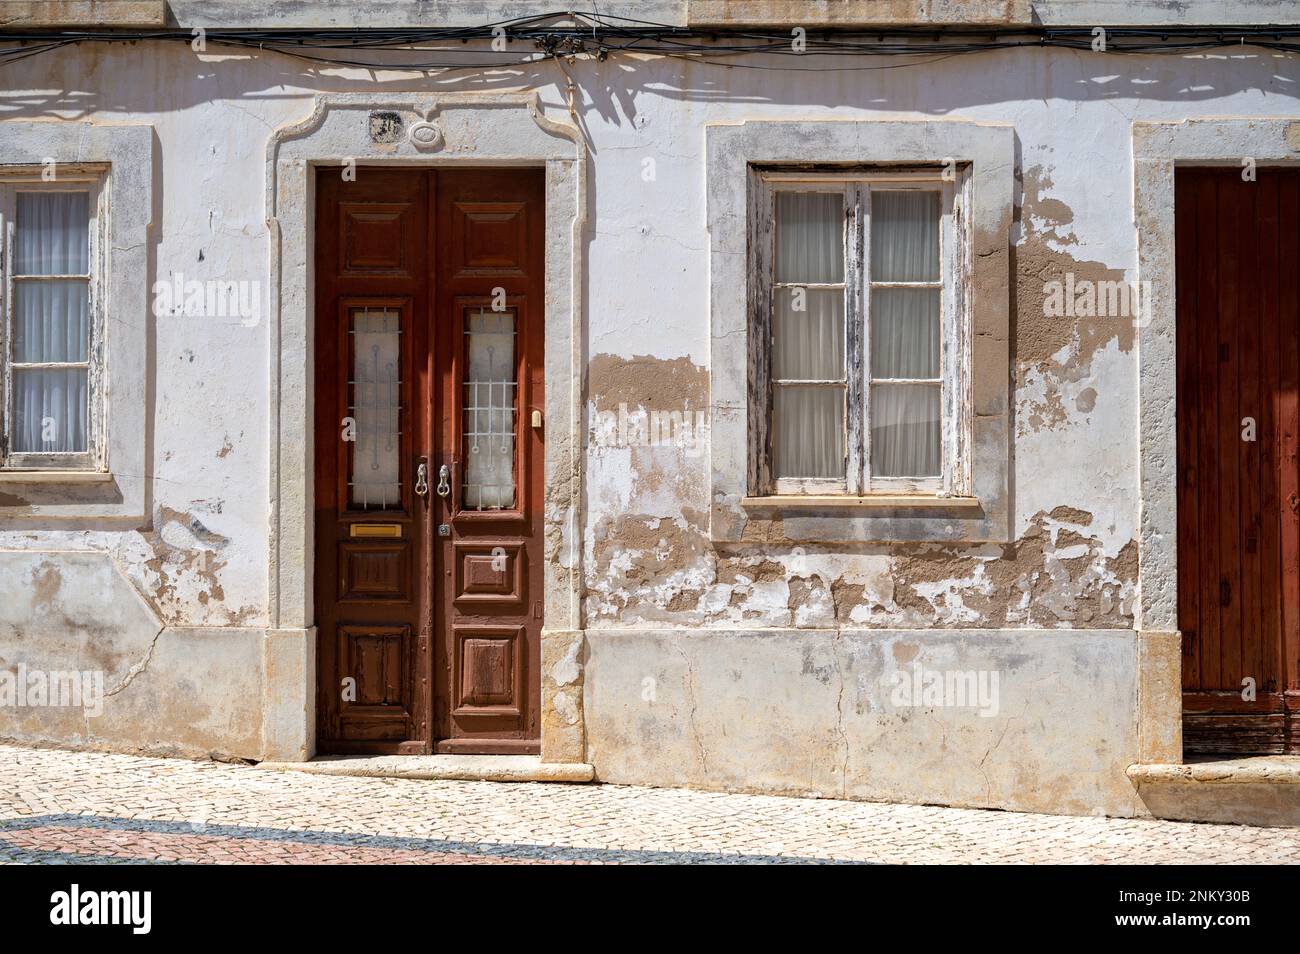 An old painted door in a old buildling in Lagos Algarve Portugal showing the traditional architecture. Stock Photo